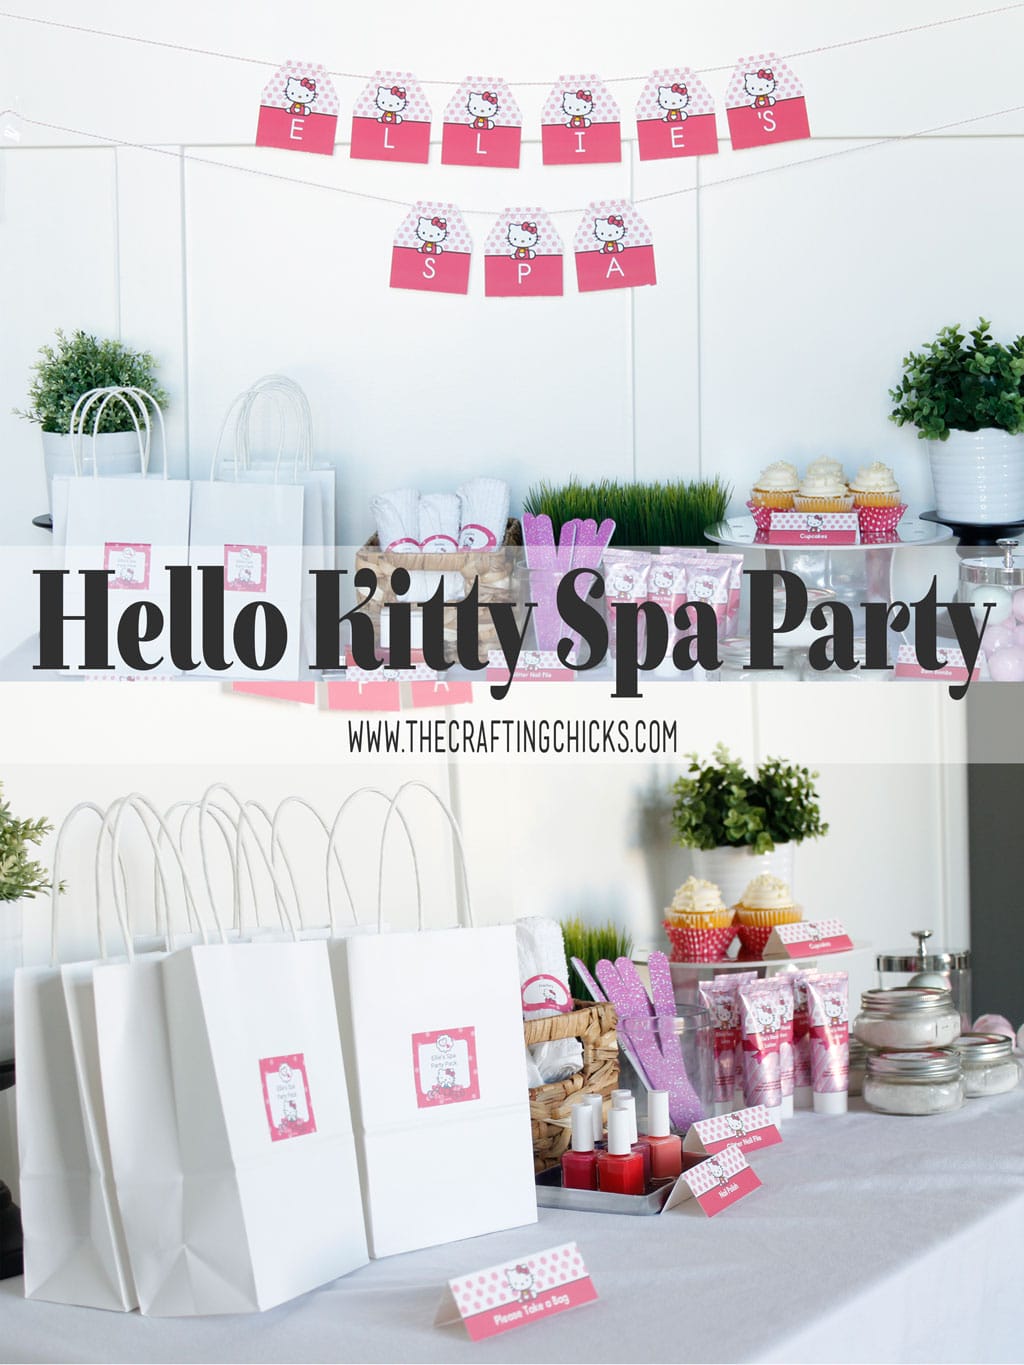 Hello Kitty Spa Party is the perfect way to add a fun flare to a little girls spa party. Adding fun pops of pink this party will be a hit.